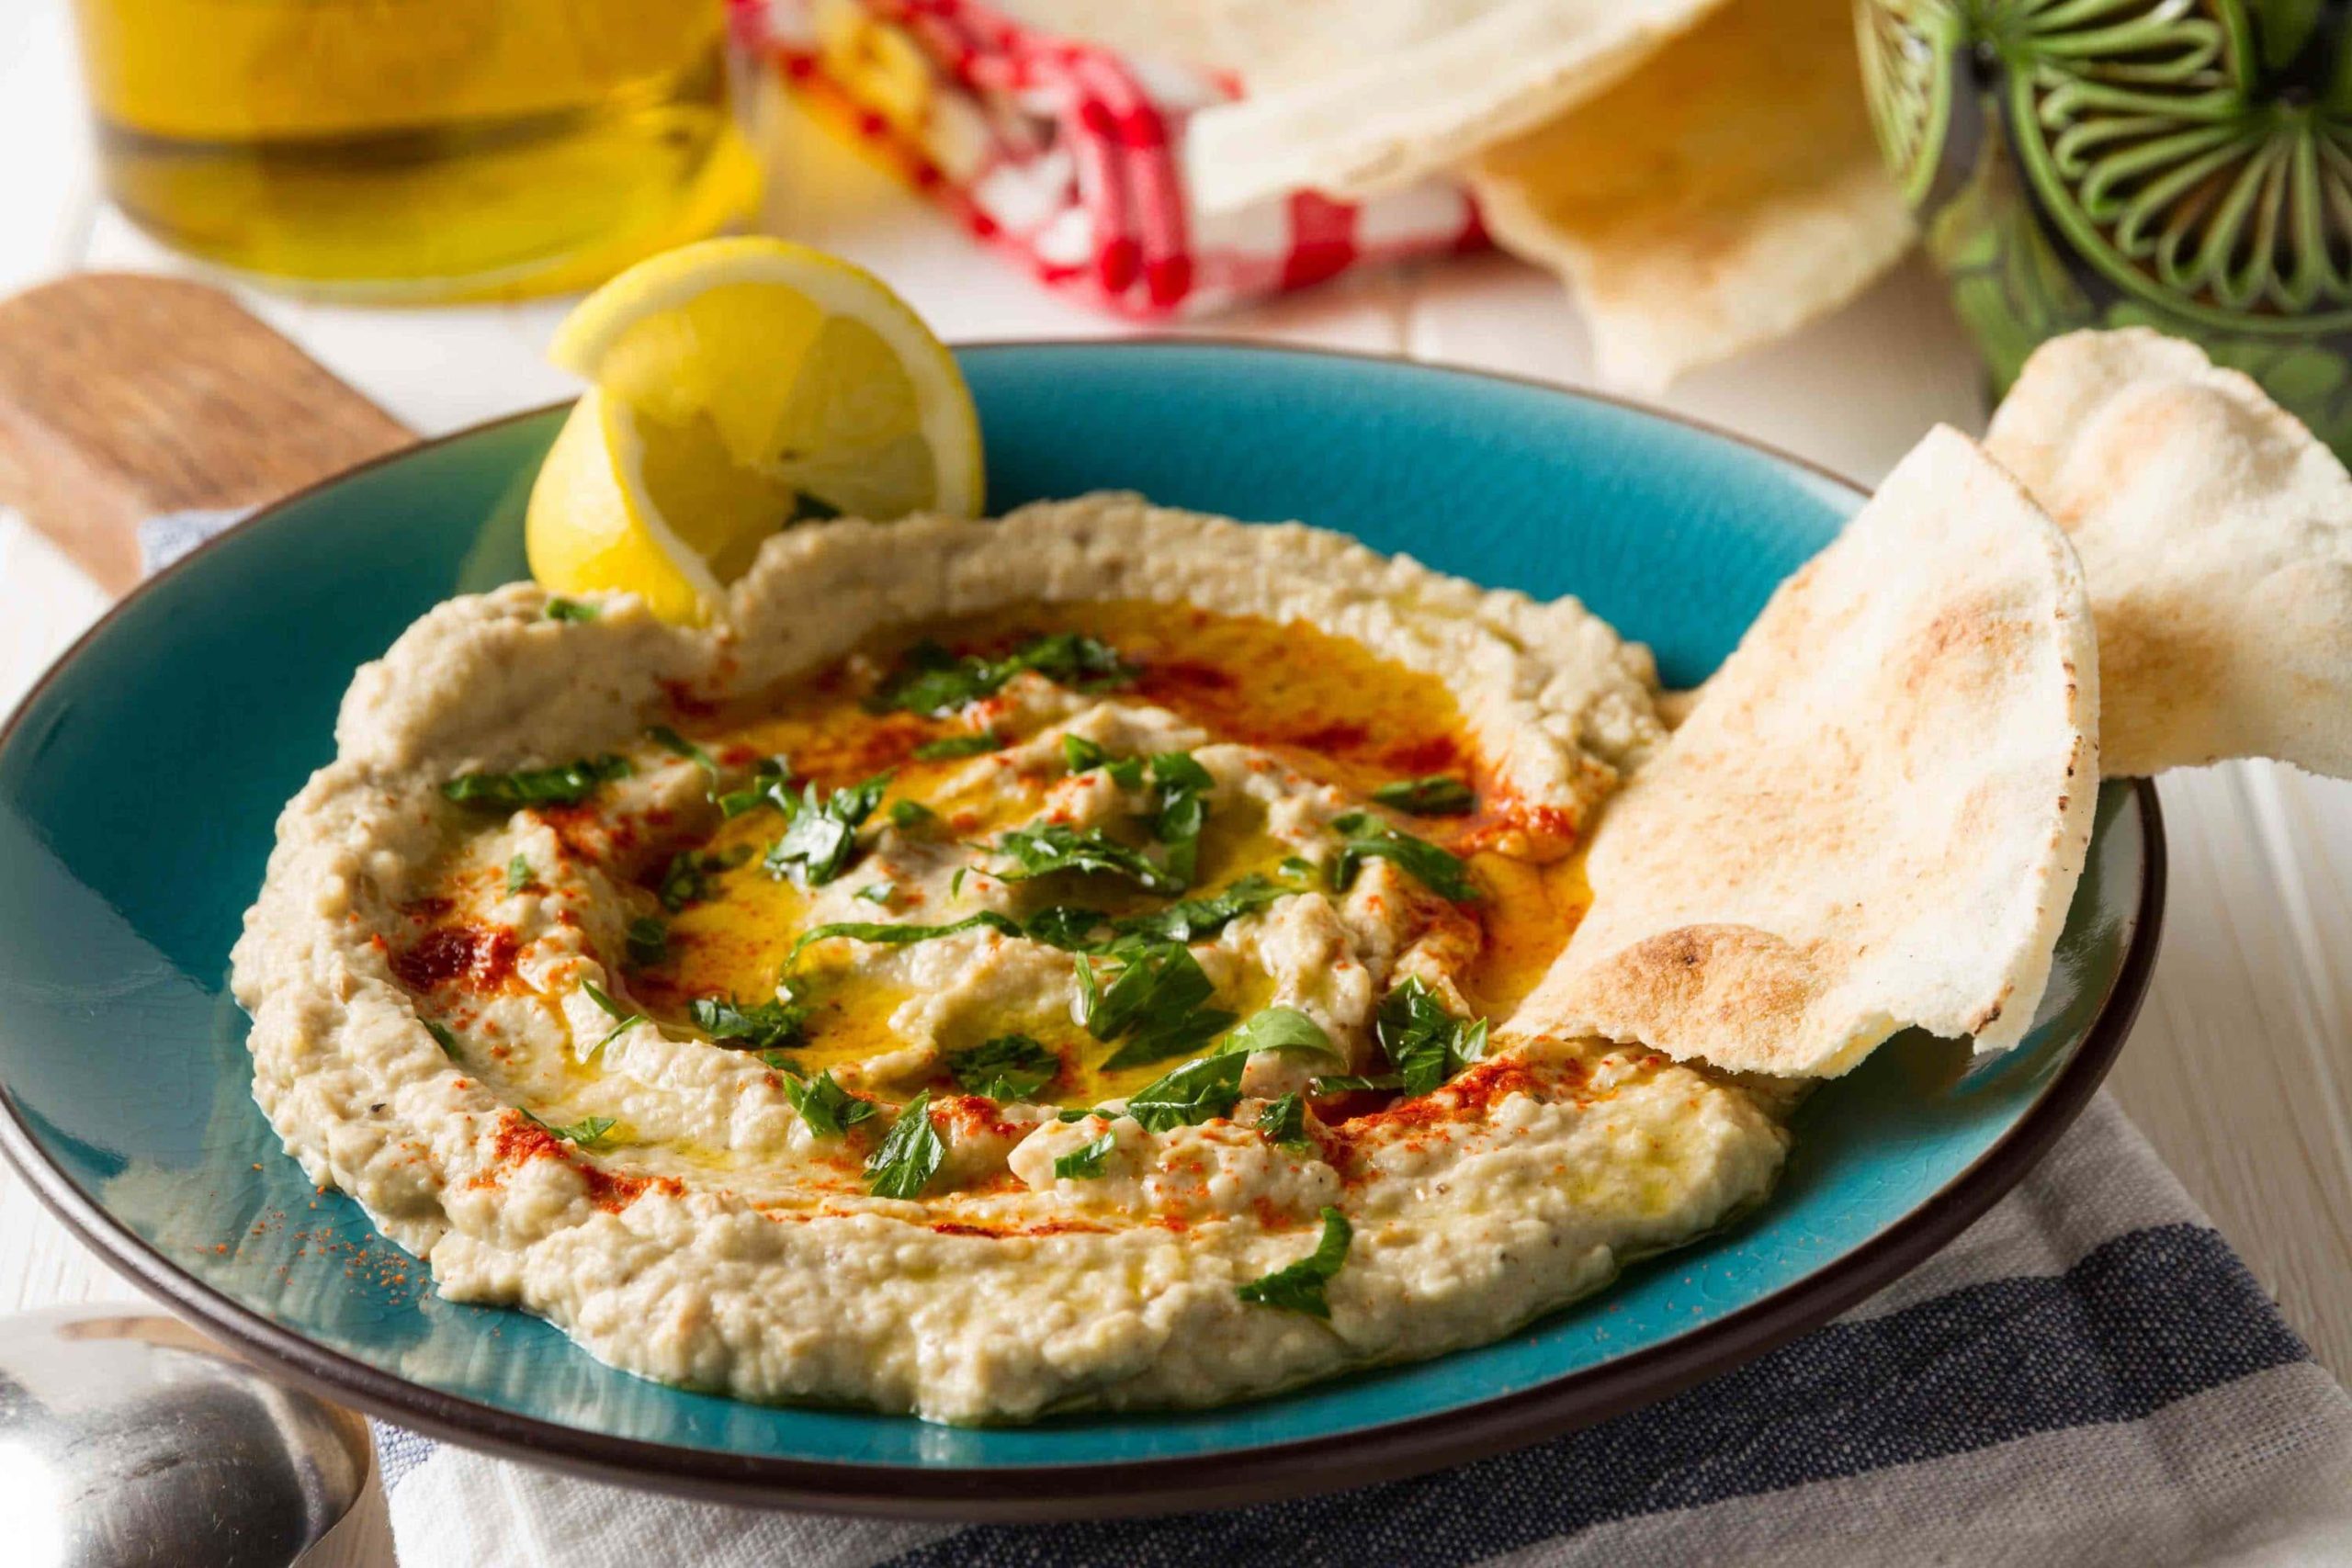 A Heavenly Babaganoush Recipe You’ll Love